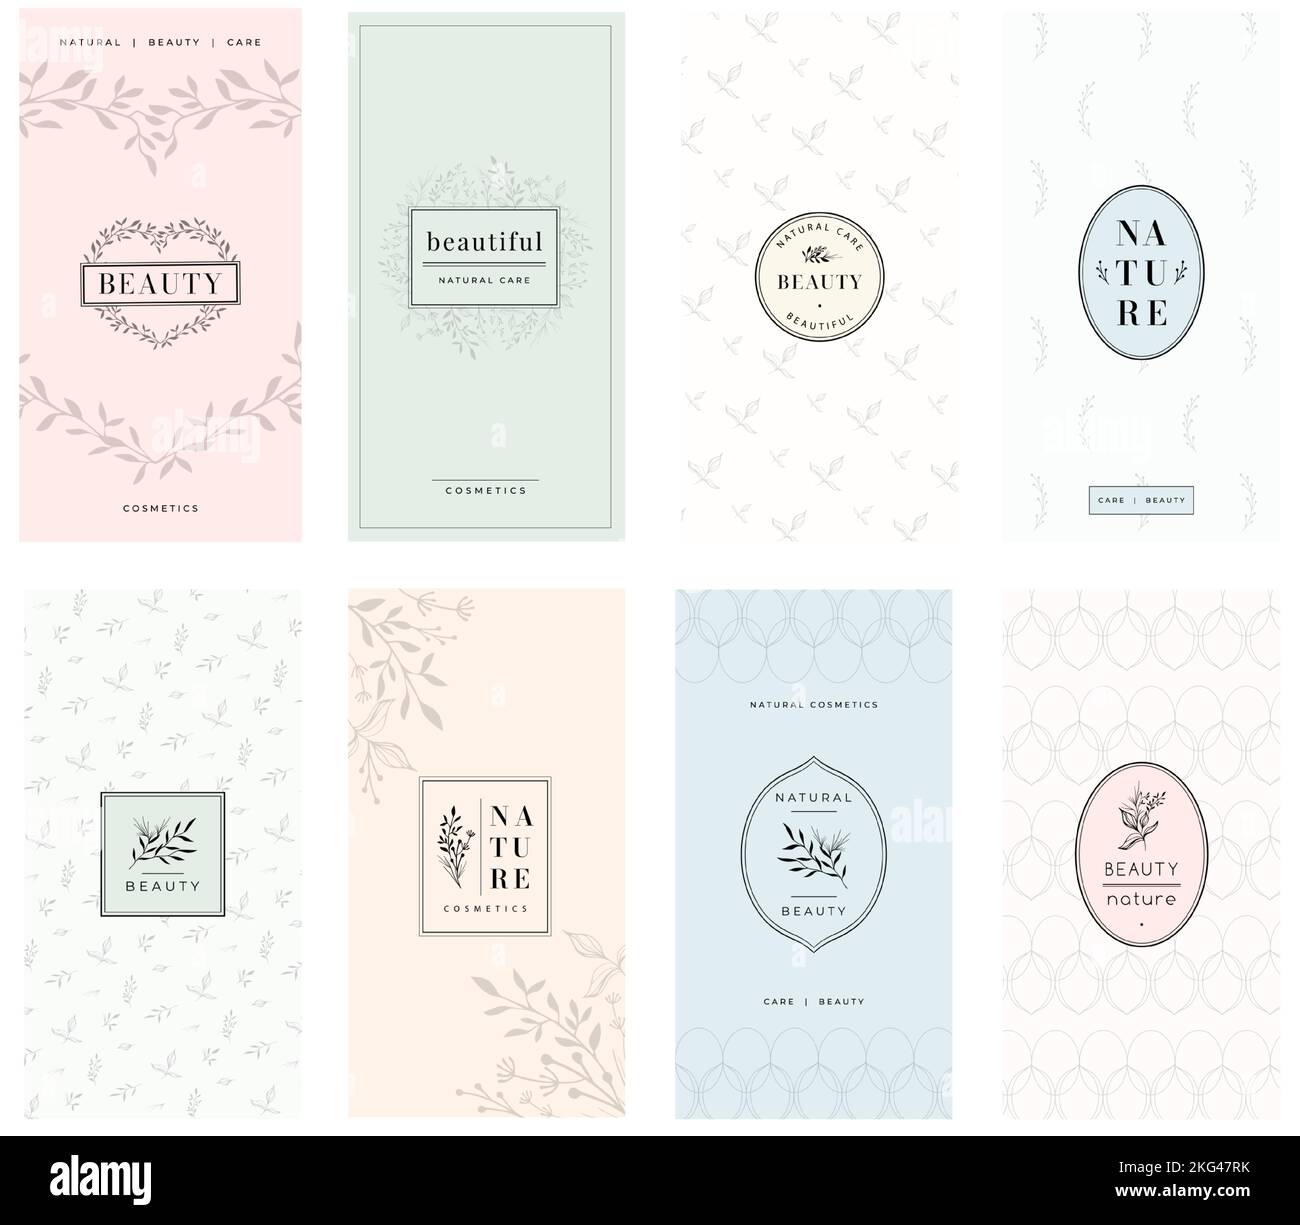 Beauty product packaging template. Floral frame and natural botanical ornament patterns for cosmetic package design vector set Stock Vector